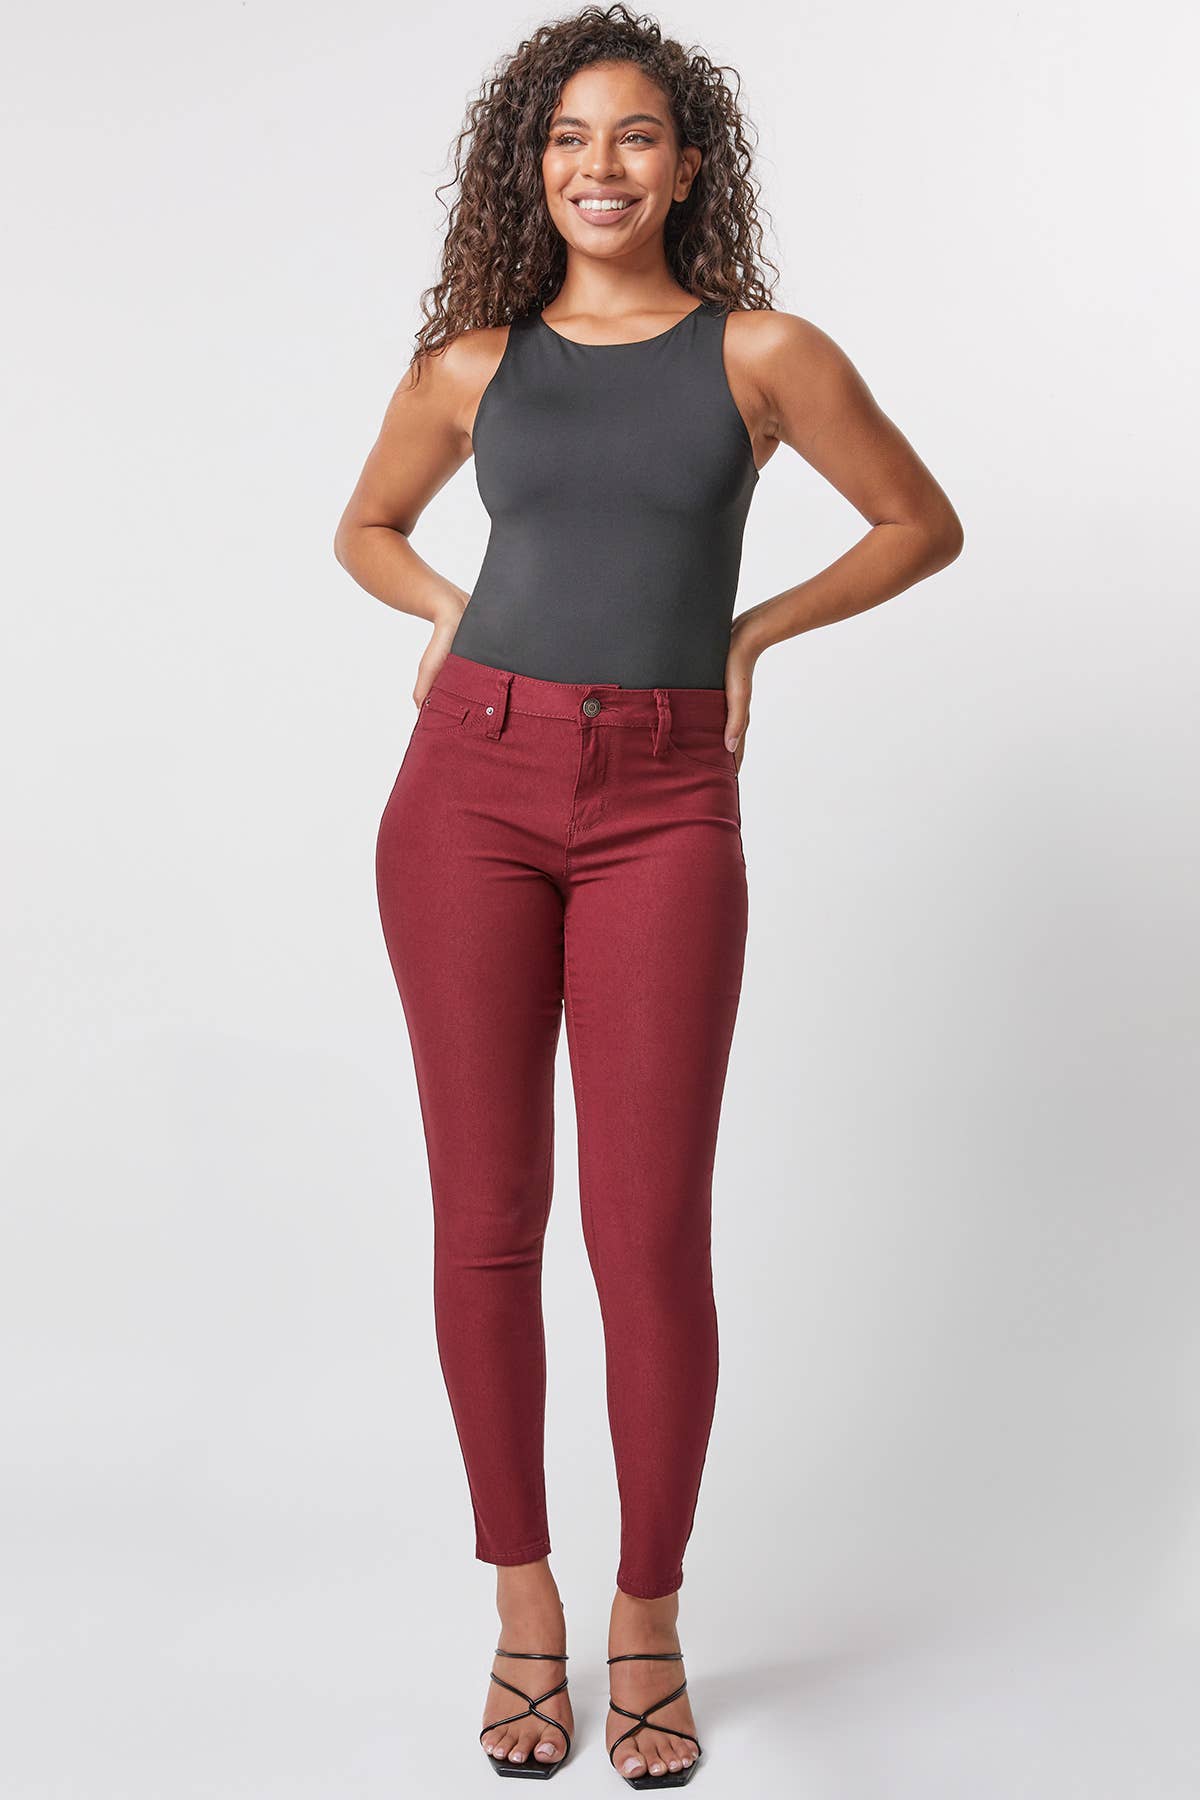 Junior Hyperstretch Mid-Rise Skinny Jean: Small / BROSE